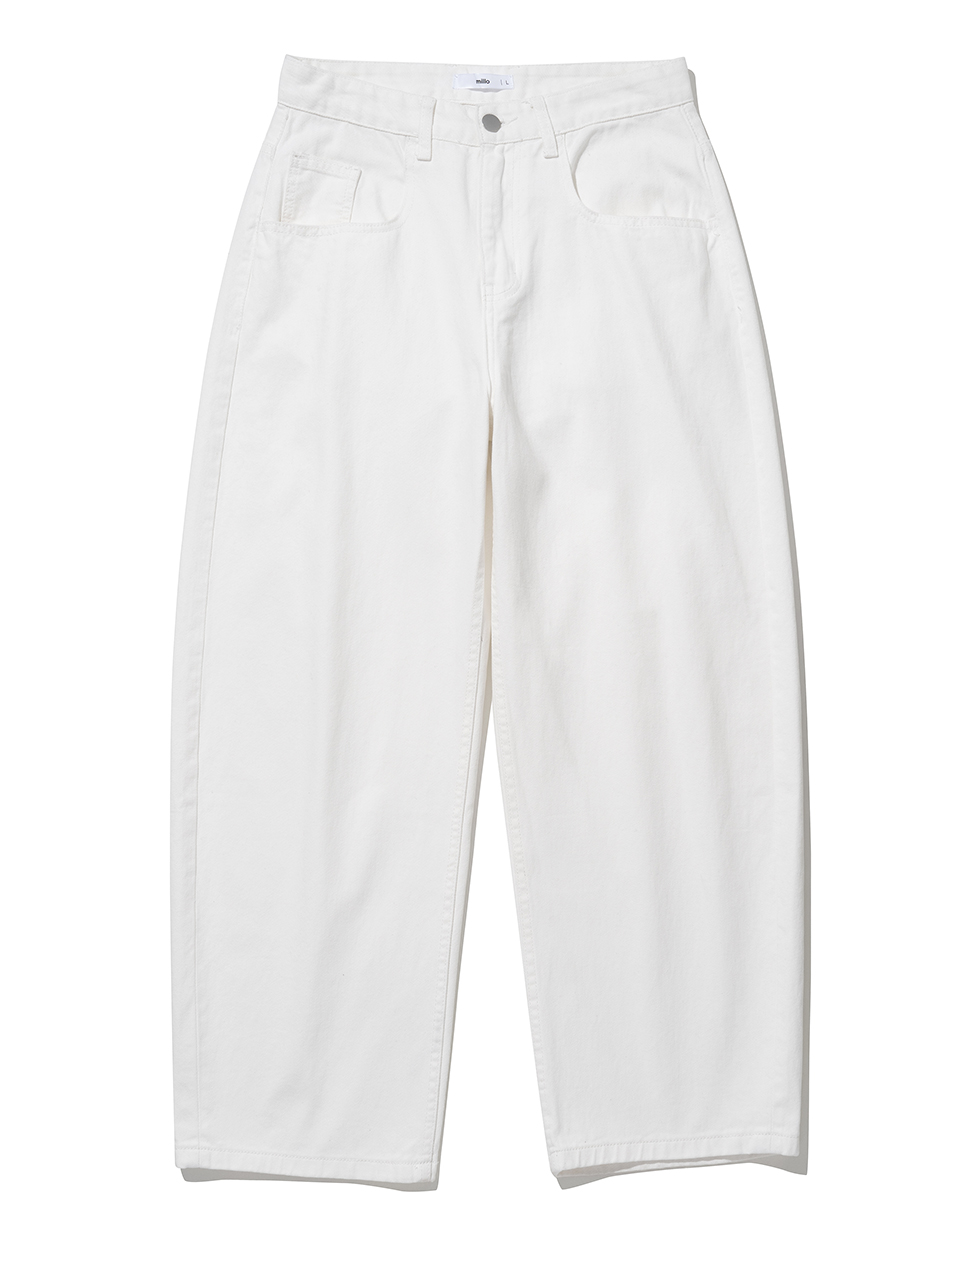 Reflect Curved Pants - Off White